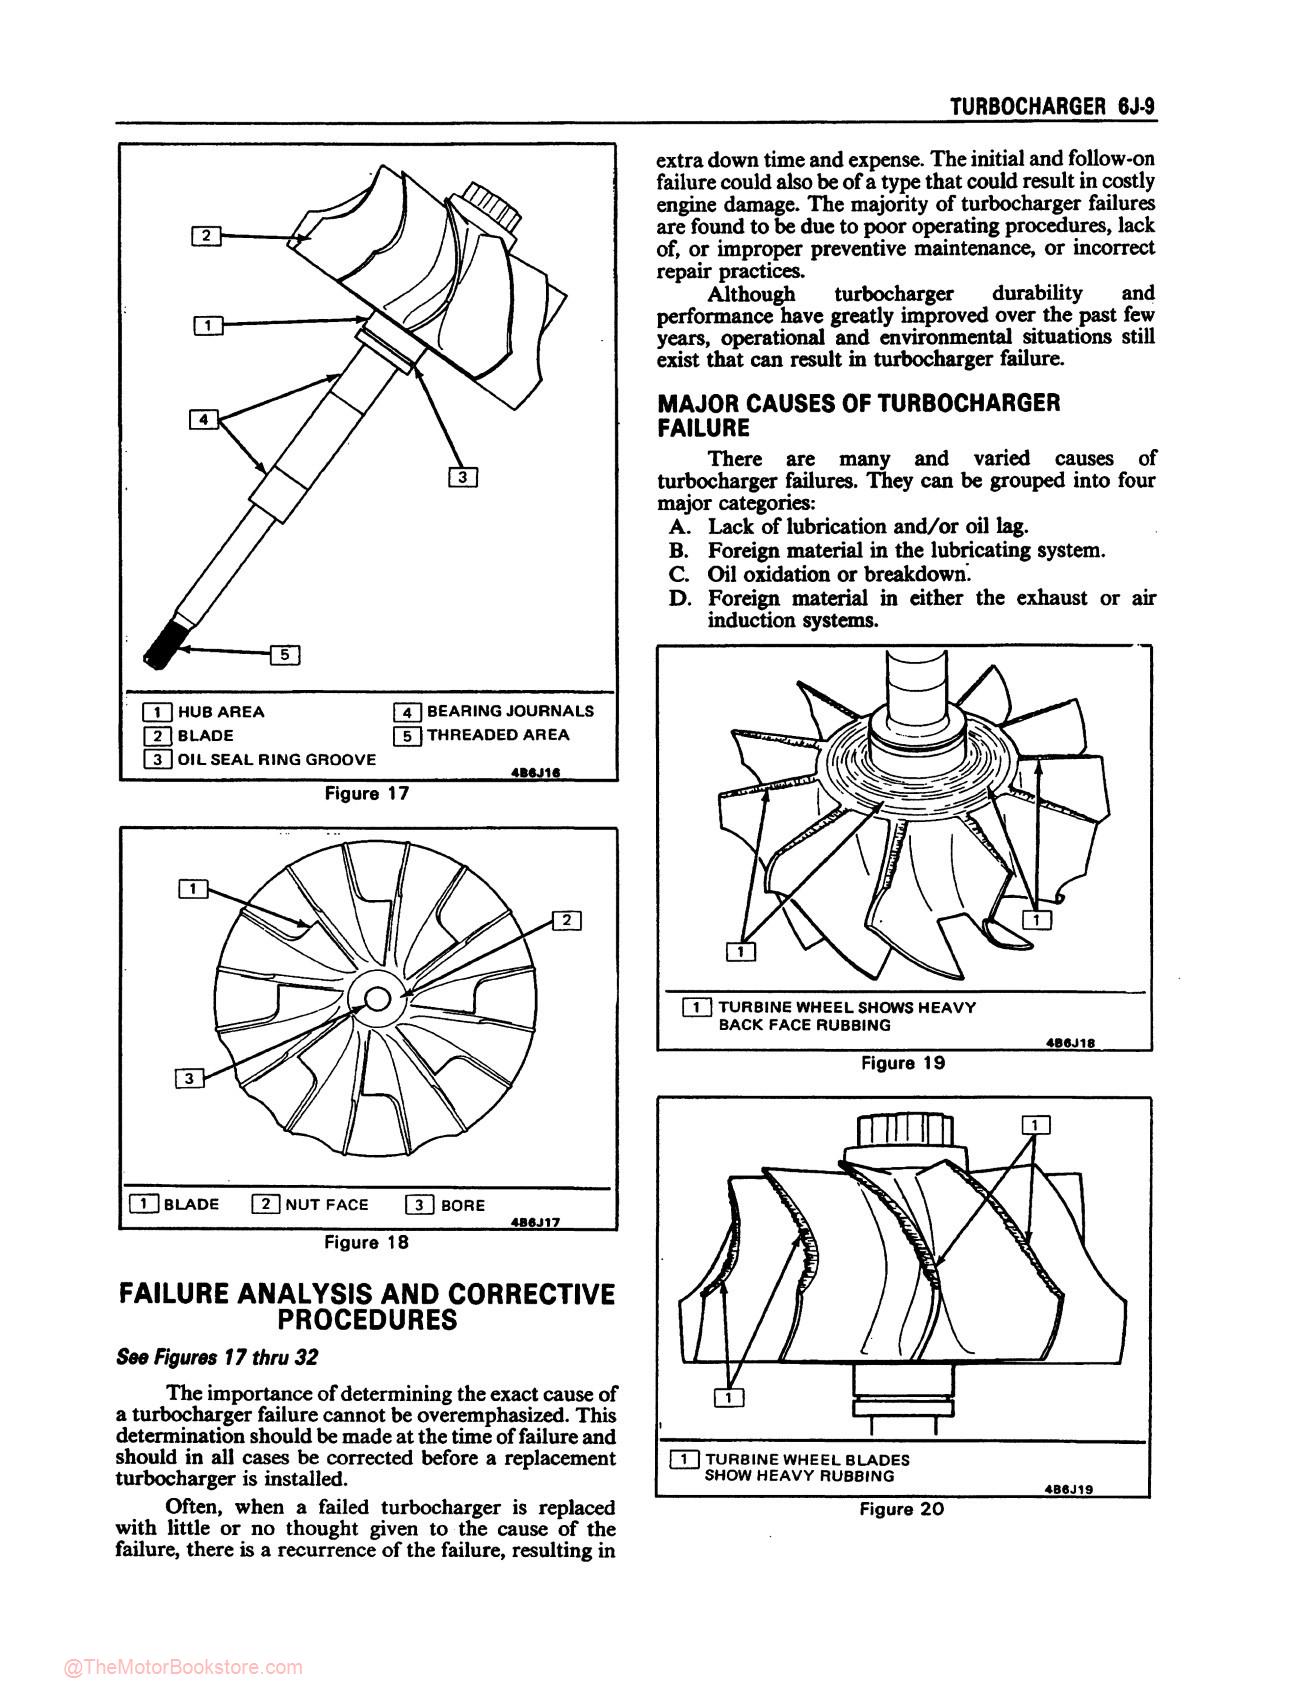 1987 Buick and Grand National Service Manual - Sample Page 3